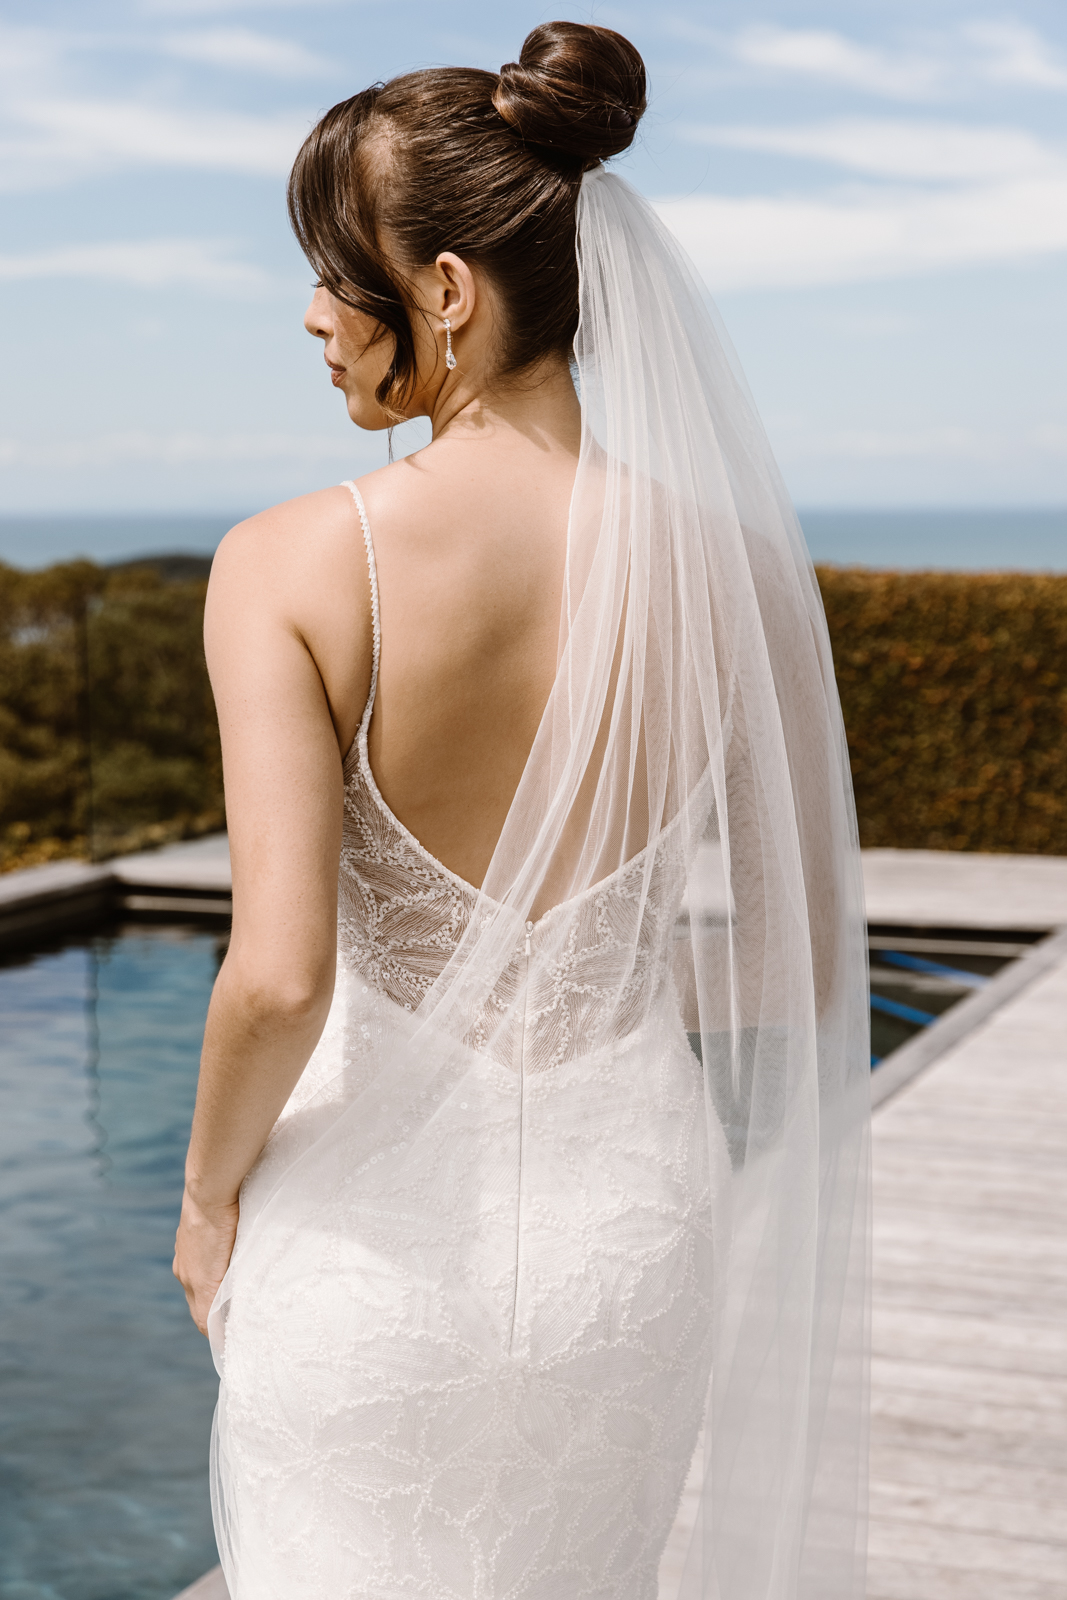 Regan is for the modern, fashion-forward bride. A deep neckline, A-line skirt & playful side-split adds the perfect juxtaposition of classic & edgy.